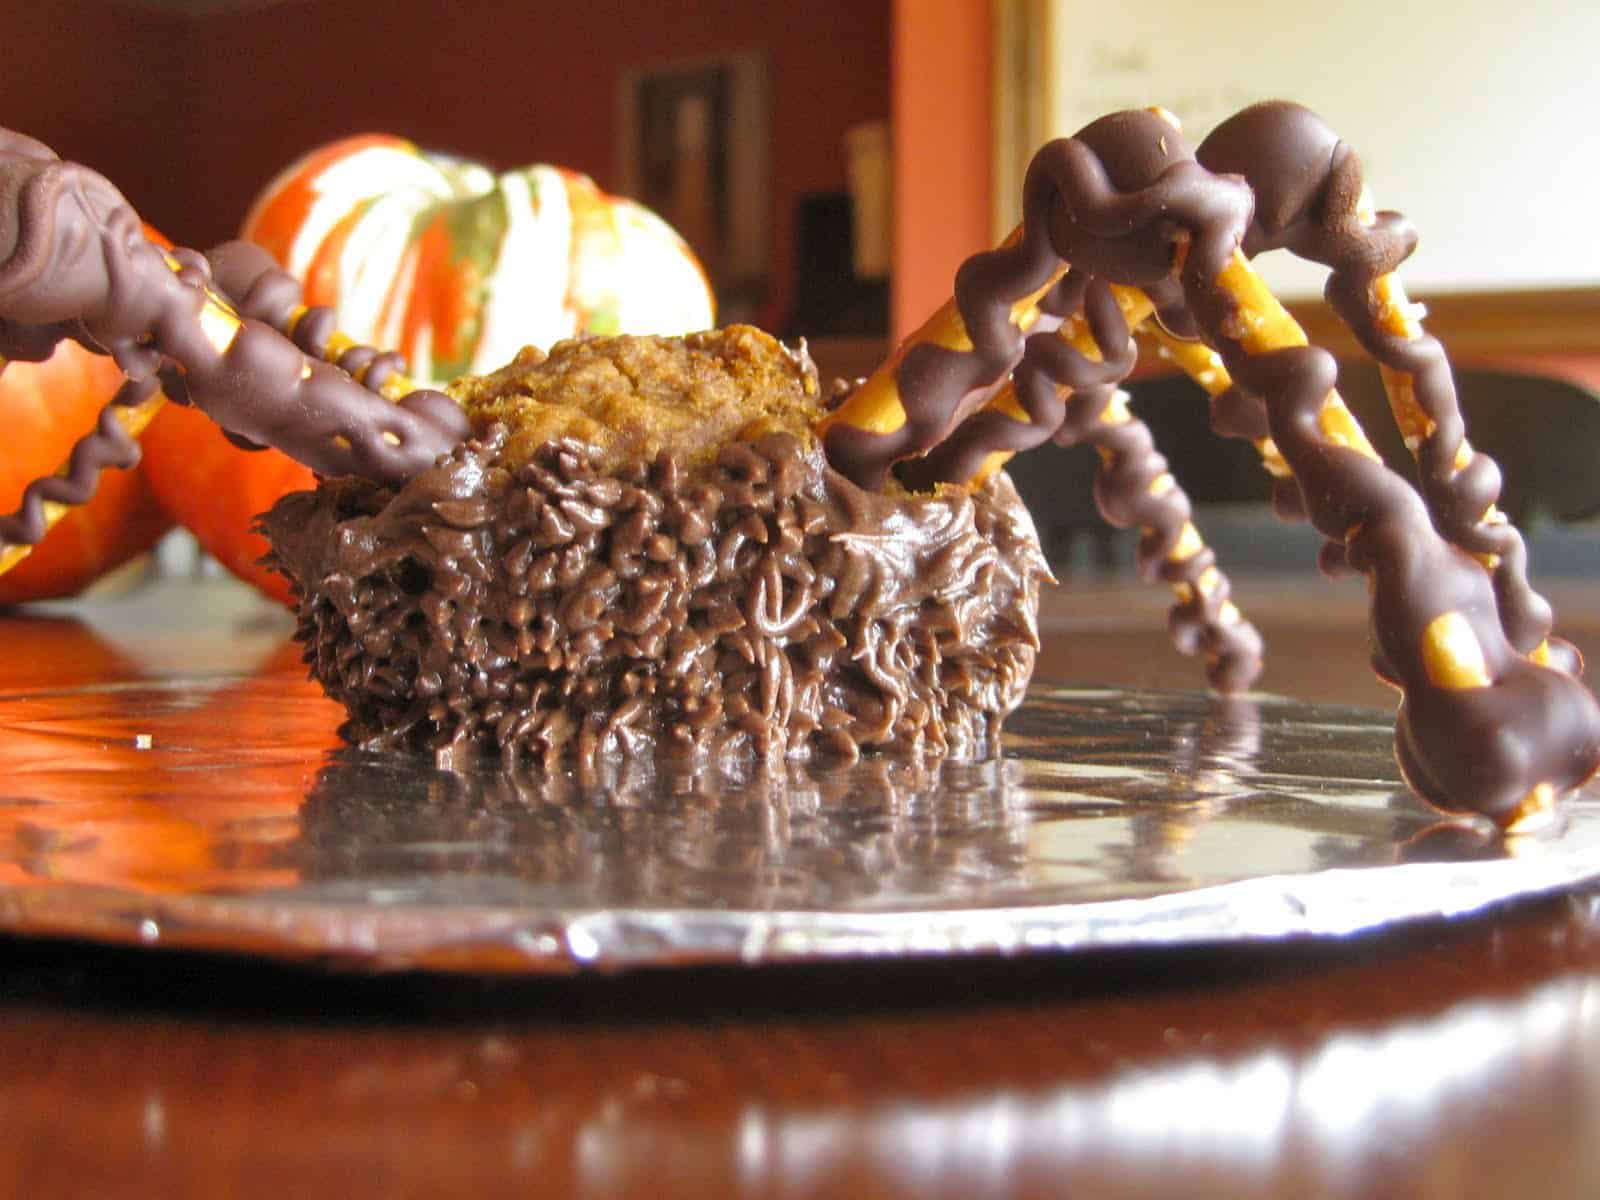 An unfinished Spider Cupcake with missing buttercream but with pretzel legs attached.